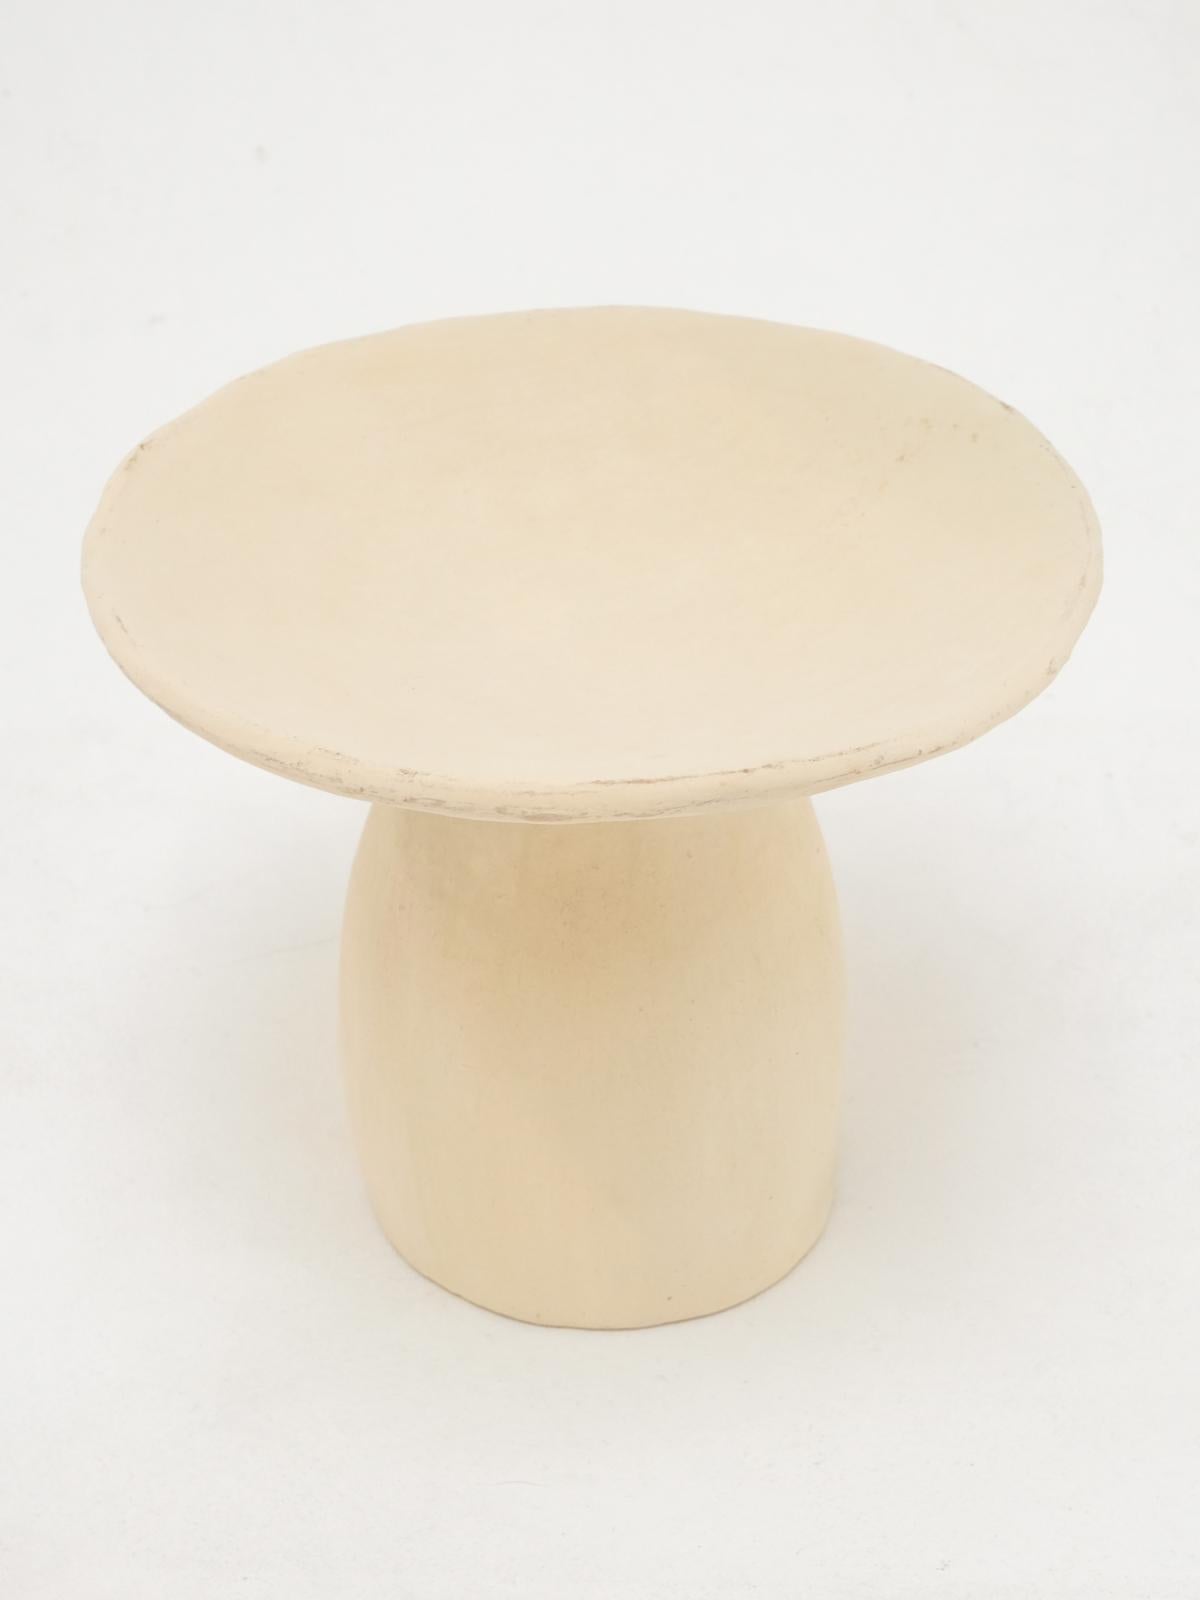 Fired White Side Tables Made of local Clay, natural pigments, Handcrafted